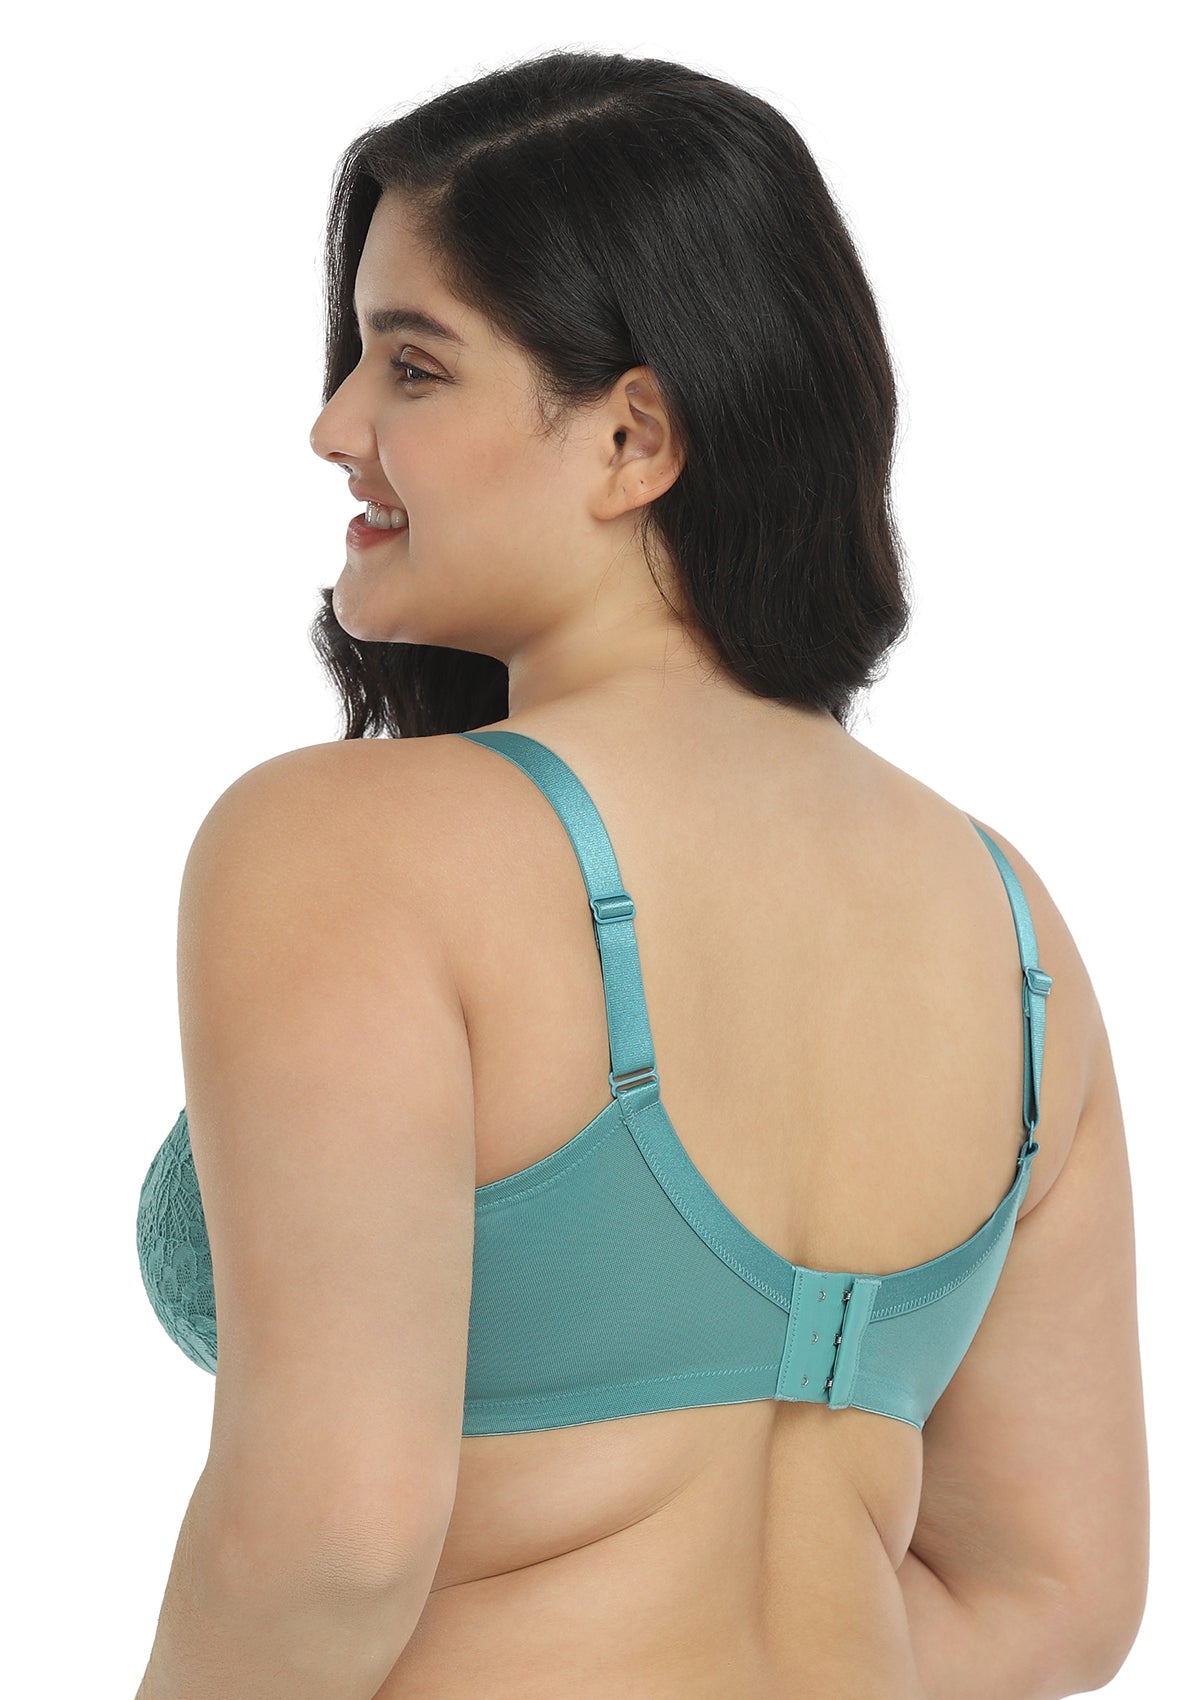 HSIA Paeonia Lace Full Coverage Underwire Non-Padded Uplifting Bra - Teal / 42 / DDD/F